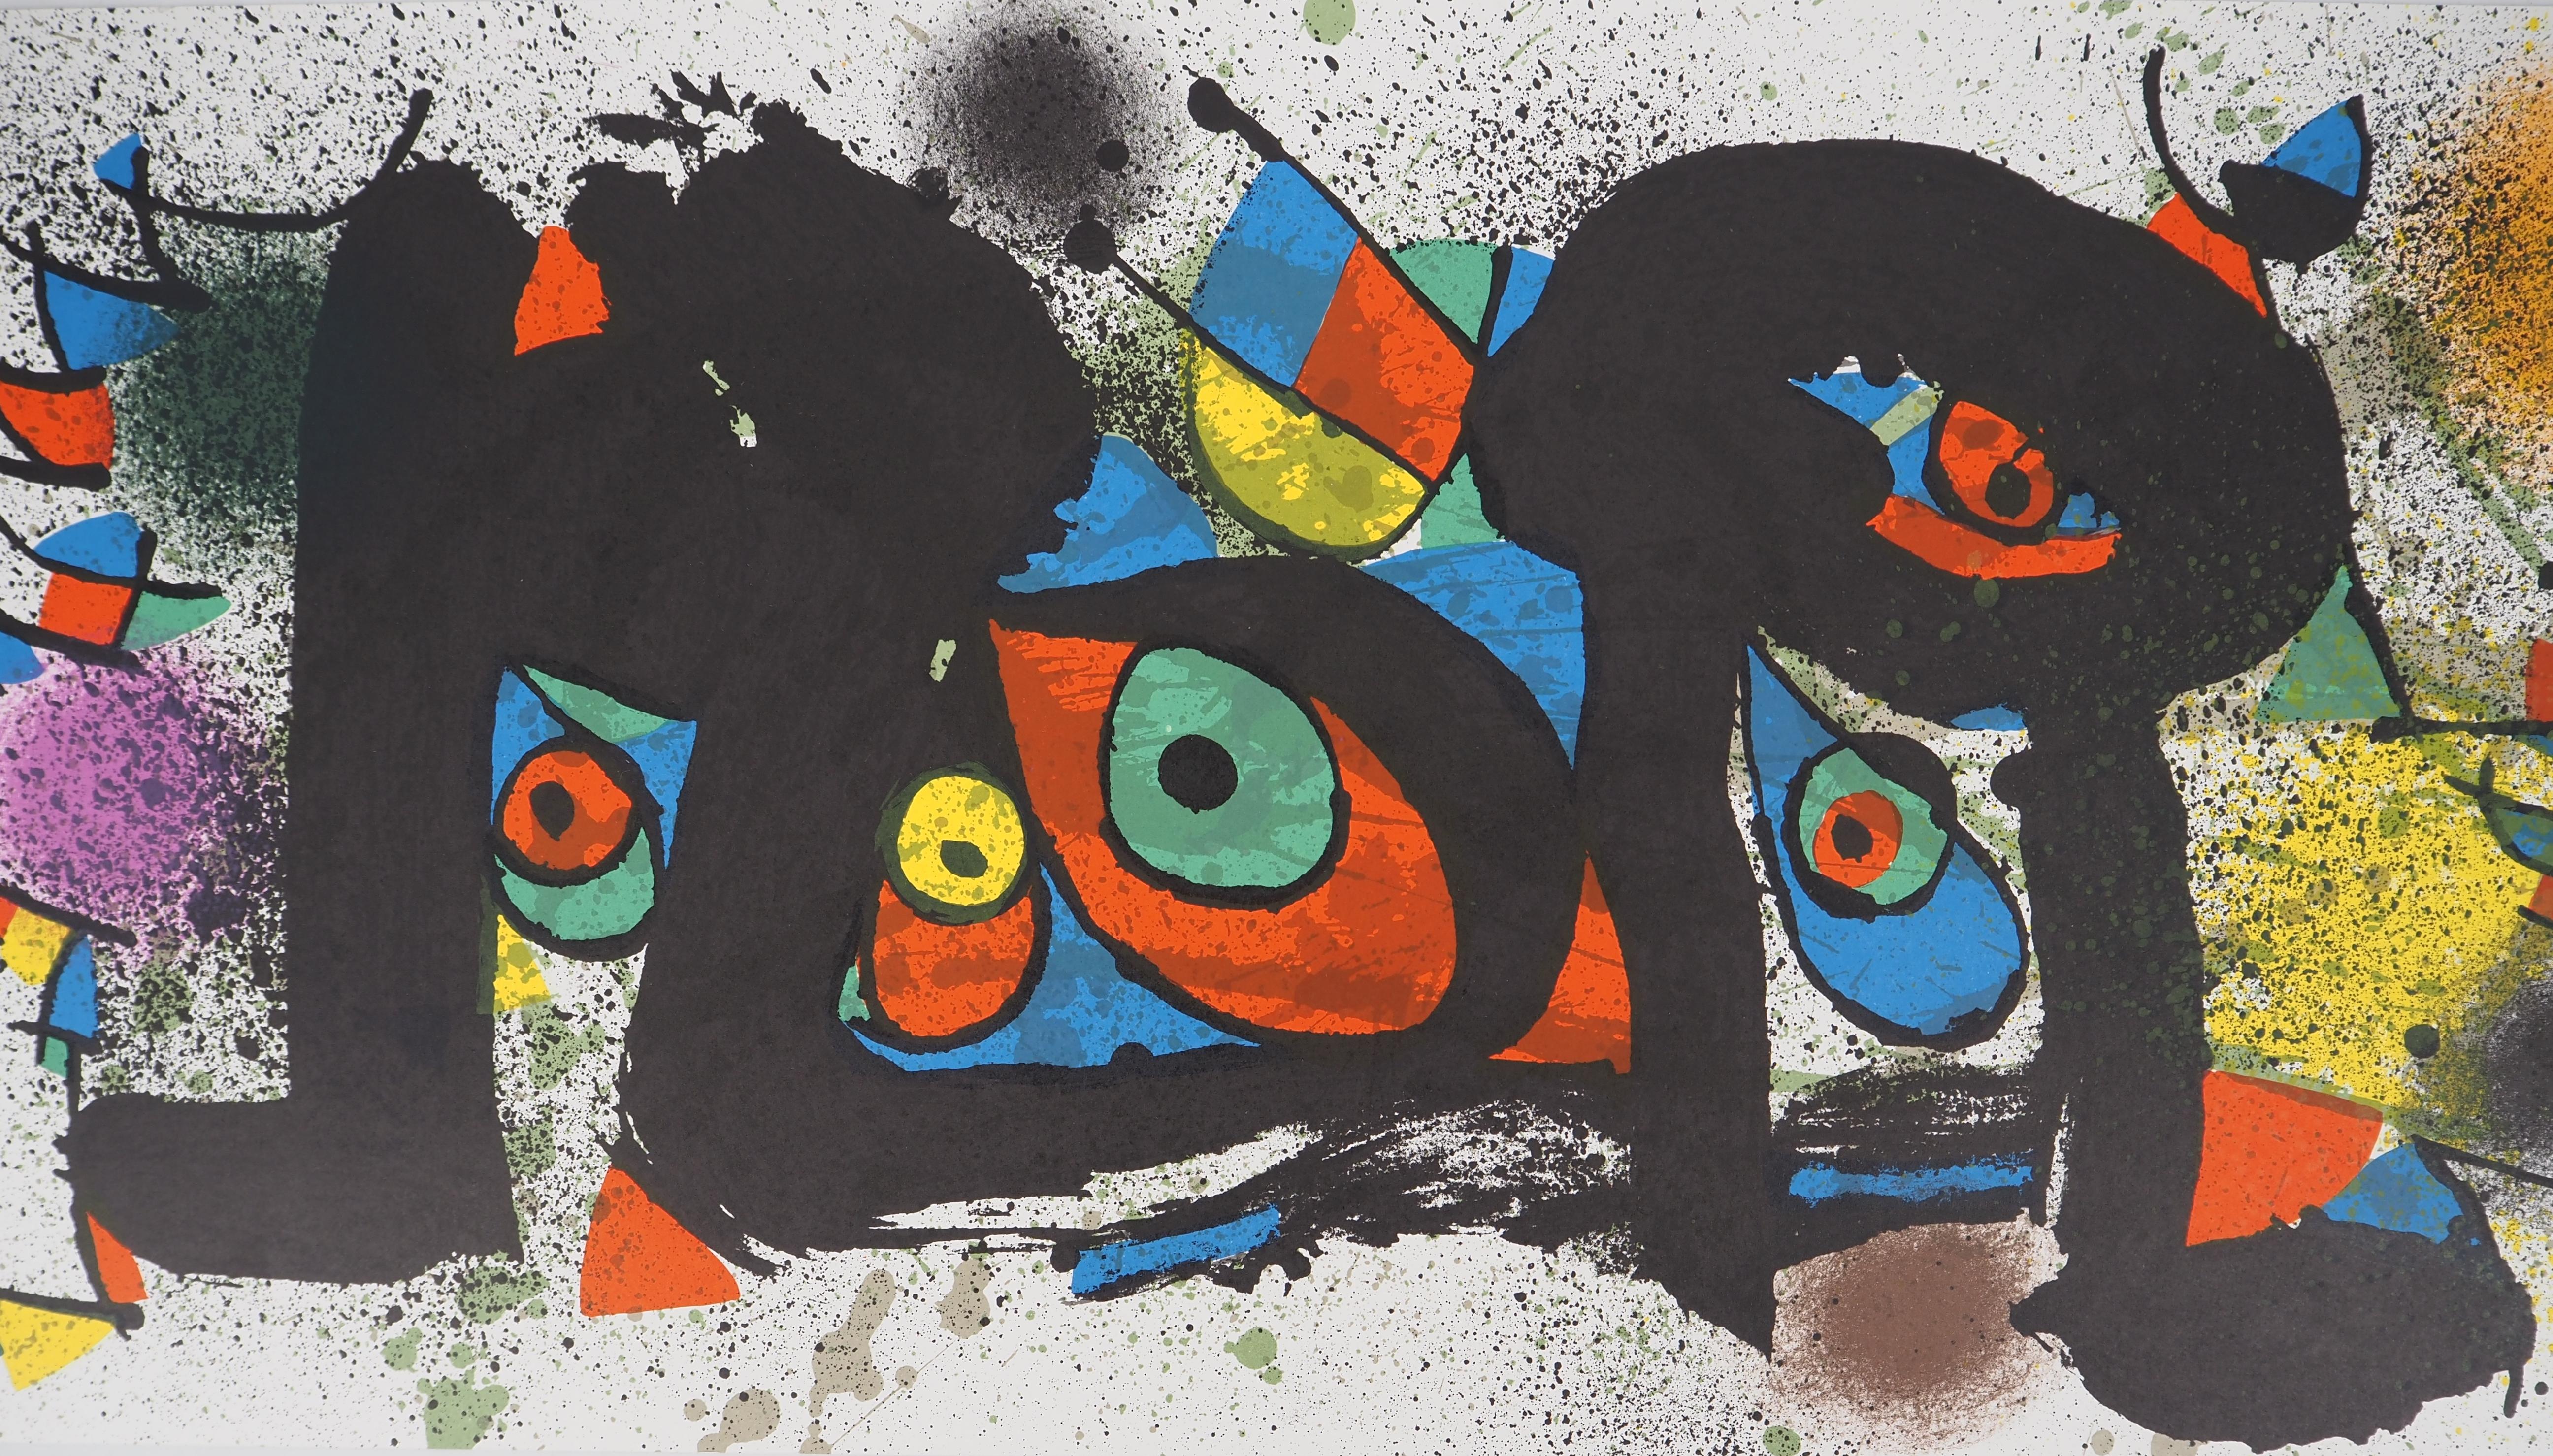 Surrealist Birds - Original Lithograph Signed in the Plate - Mourlot #948 - Print by Joan Miró